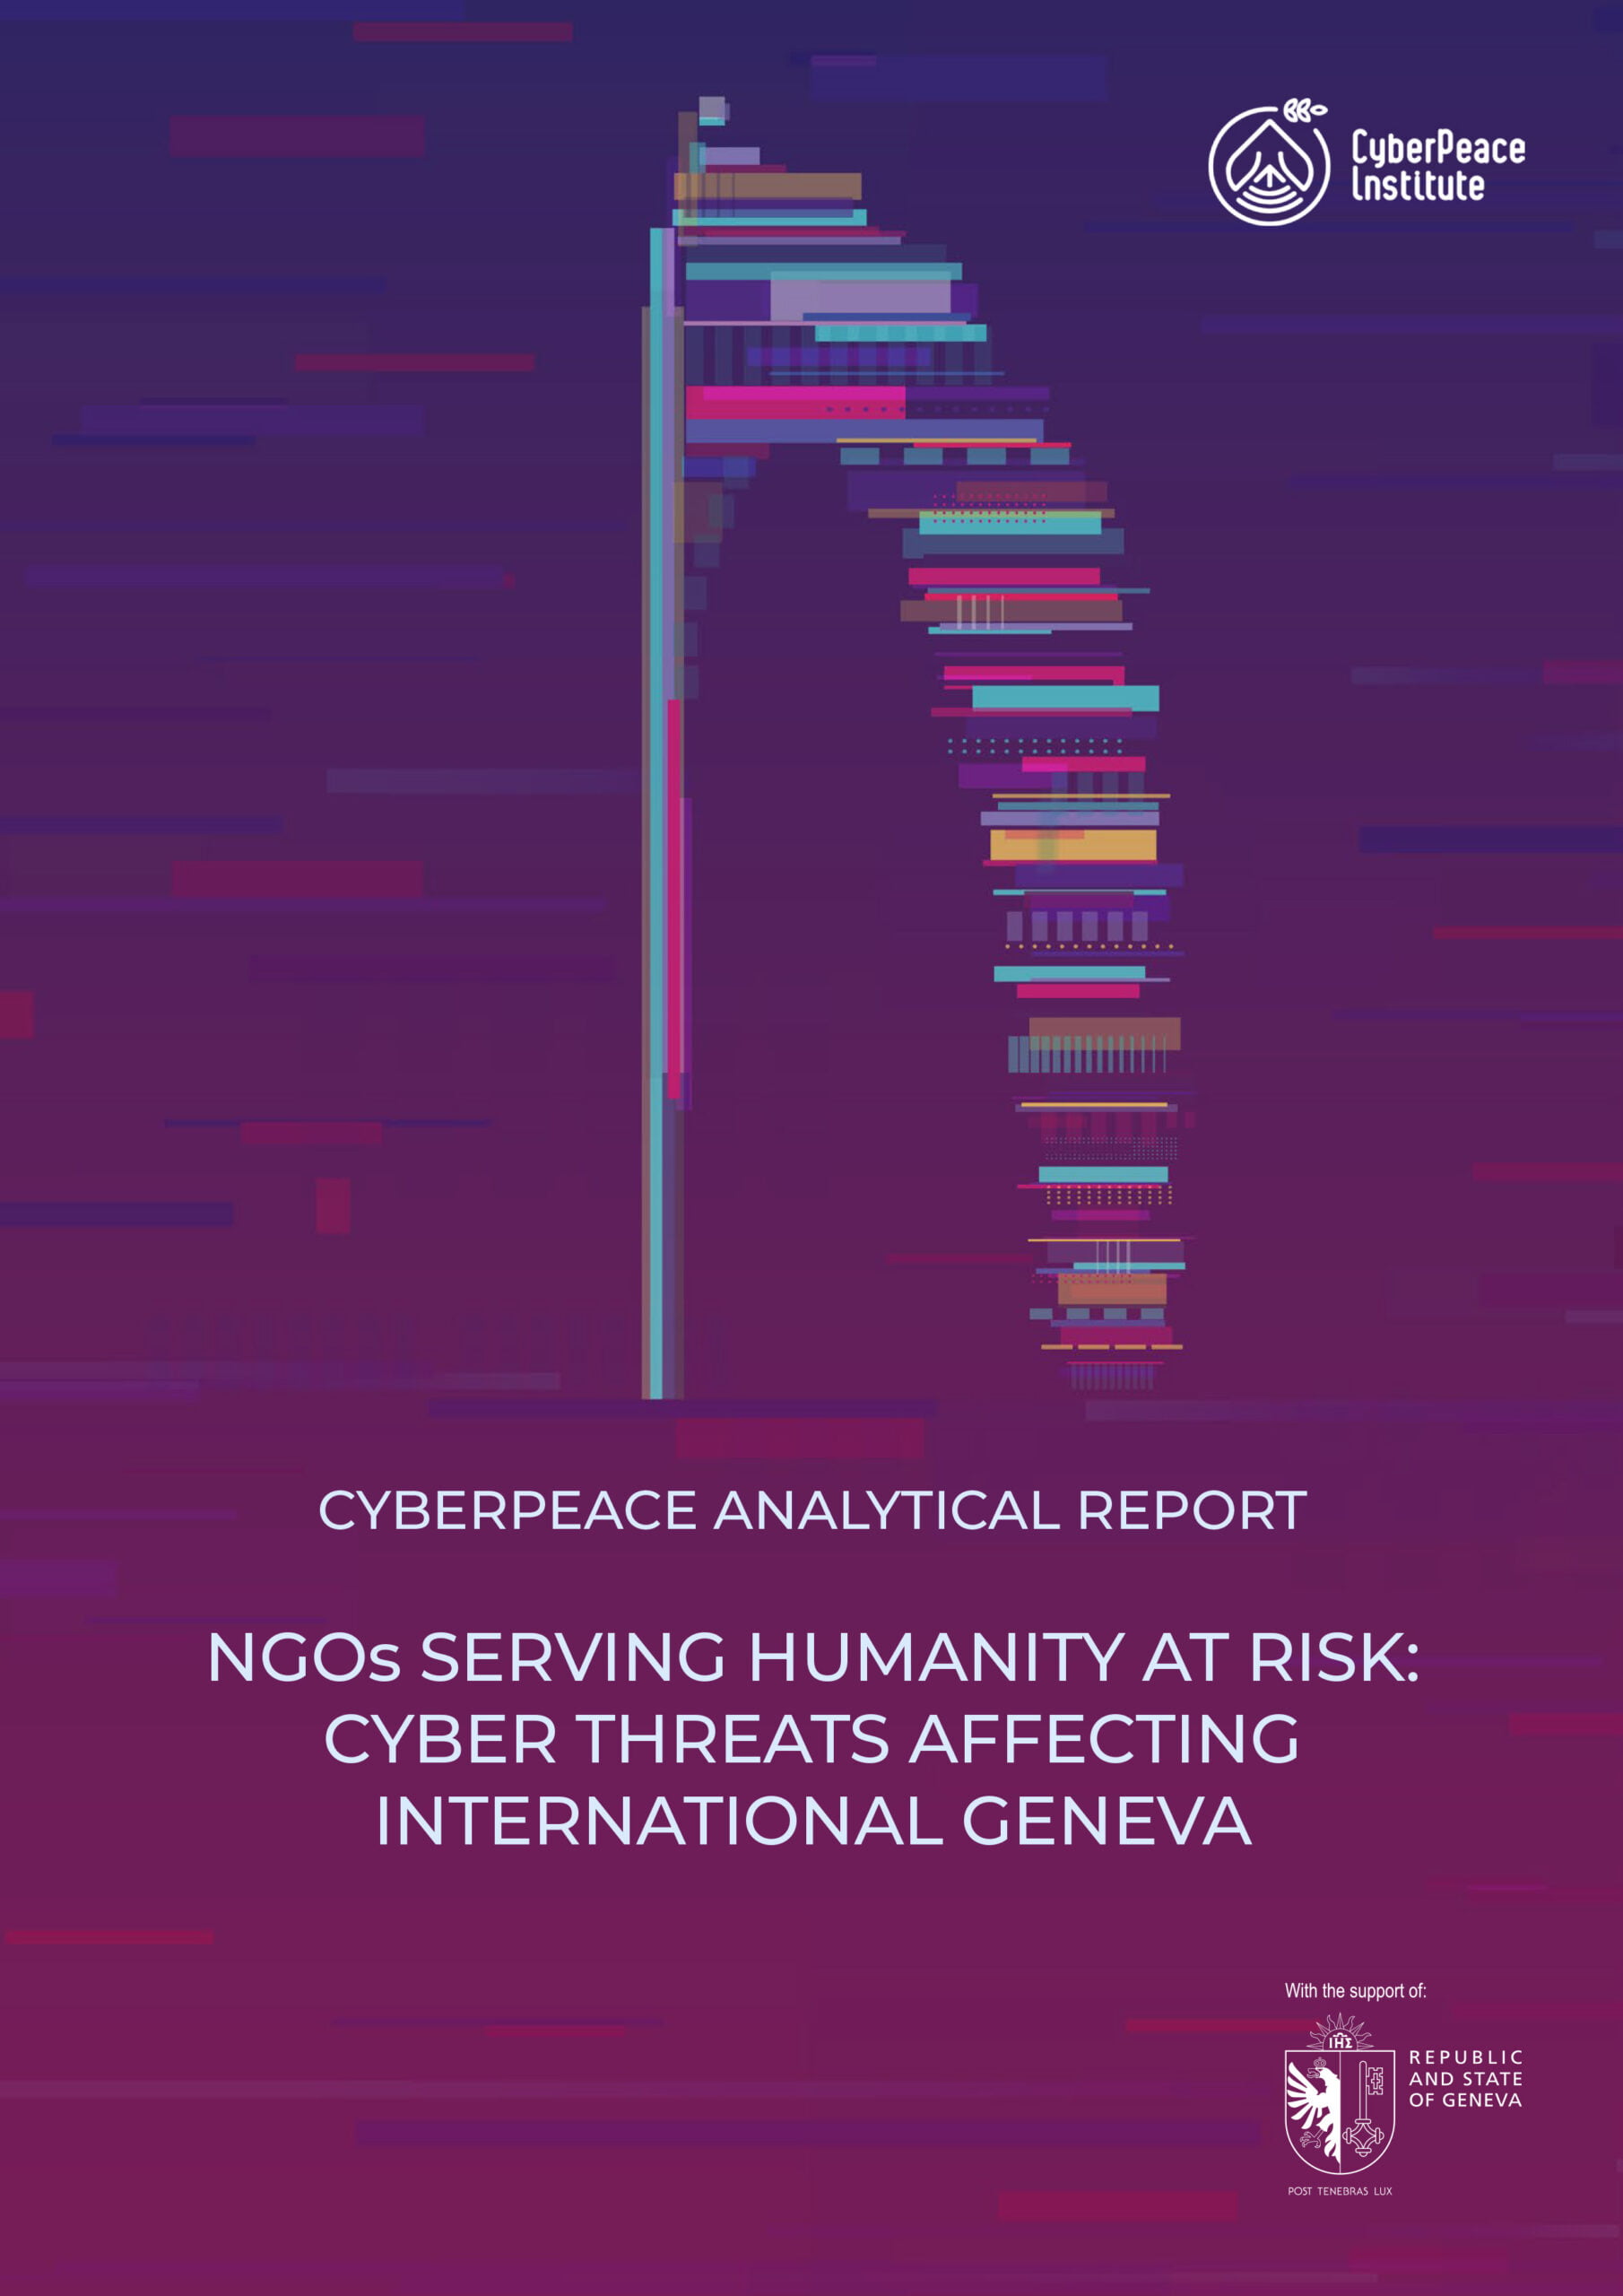 CyberPeace Analytical Report – NGOs serving Humanity at risk: Cyber Threats affecting “International Geneva”